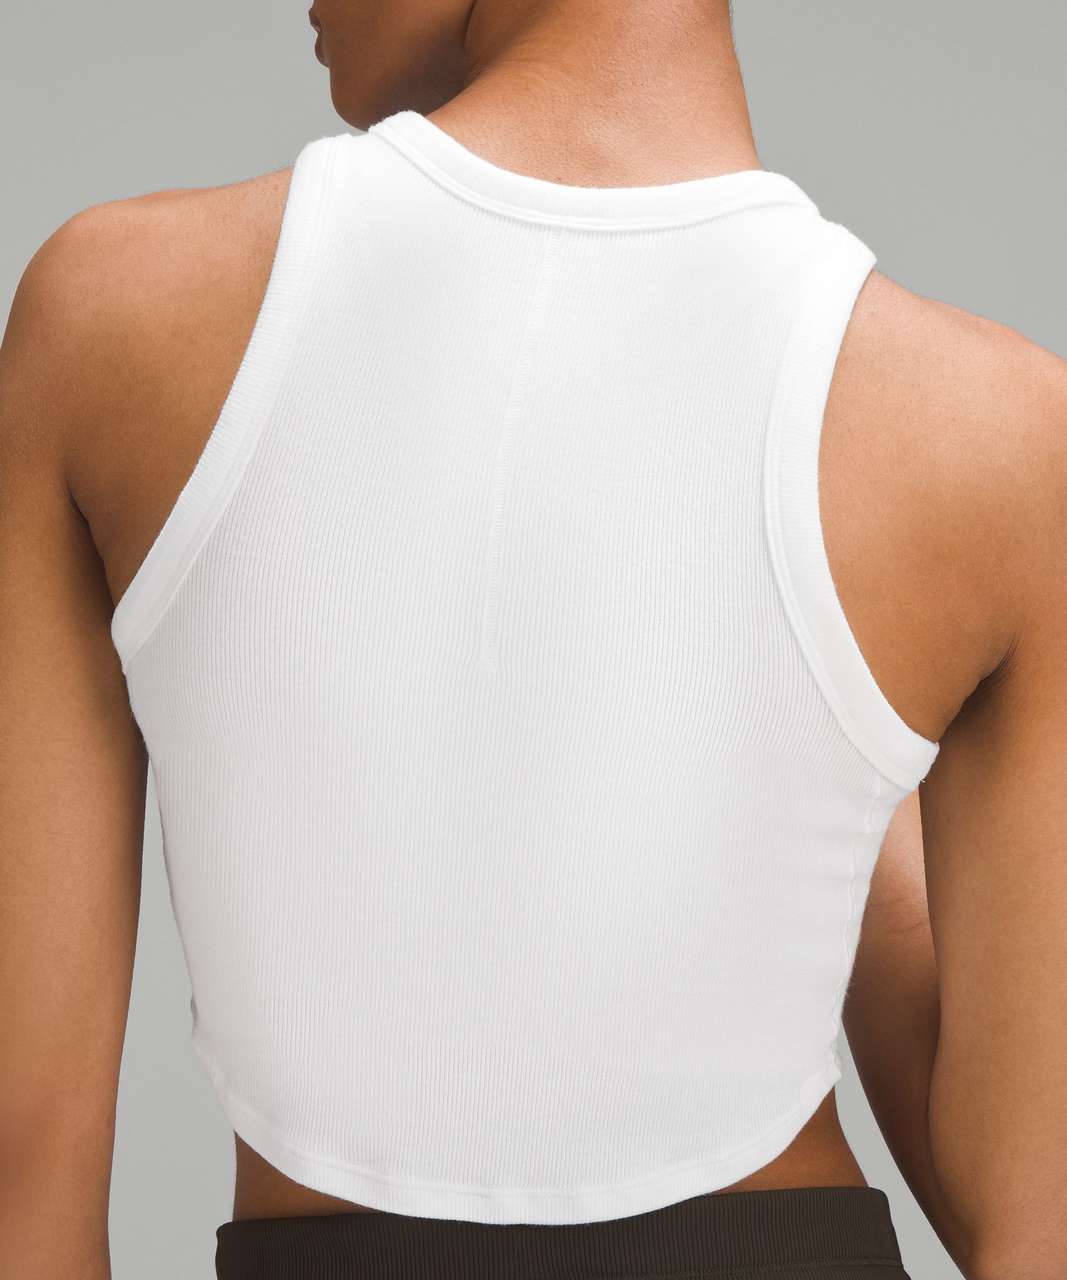 Lululemon Hold Tight Cropped Tank Top - White